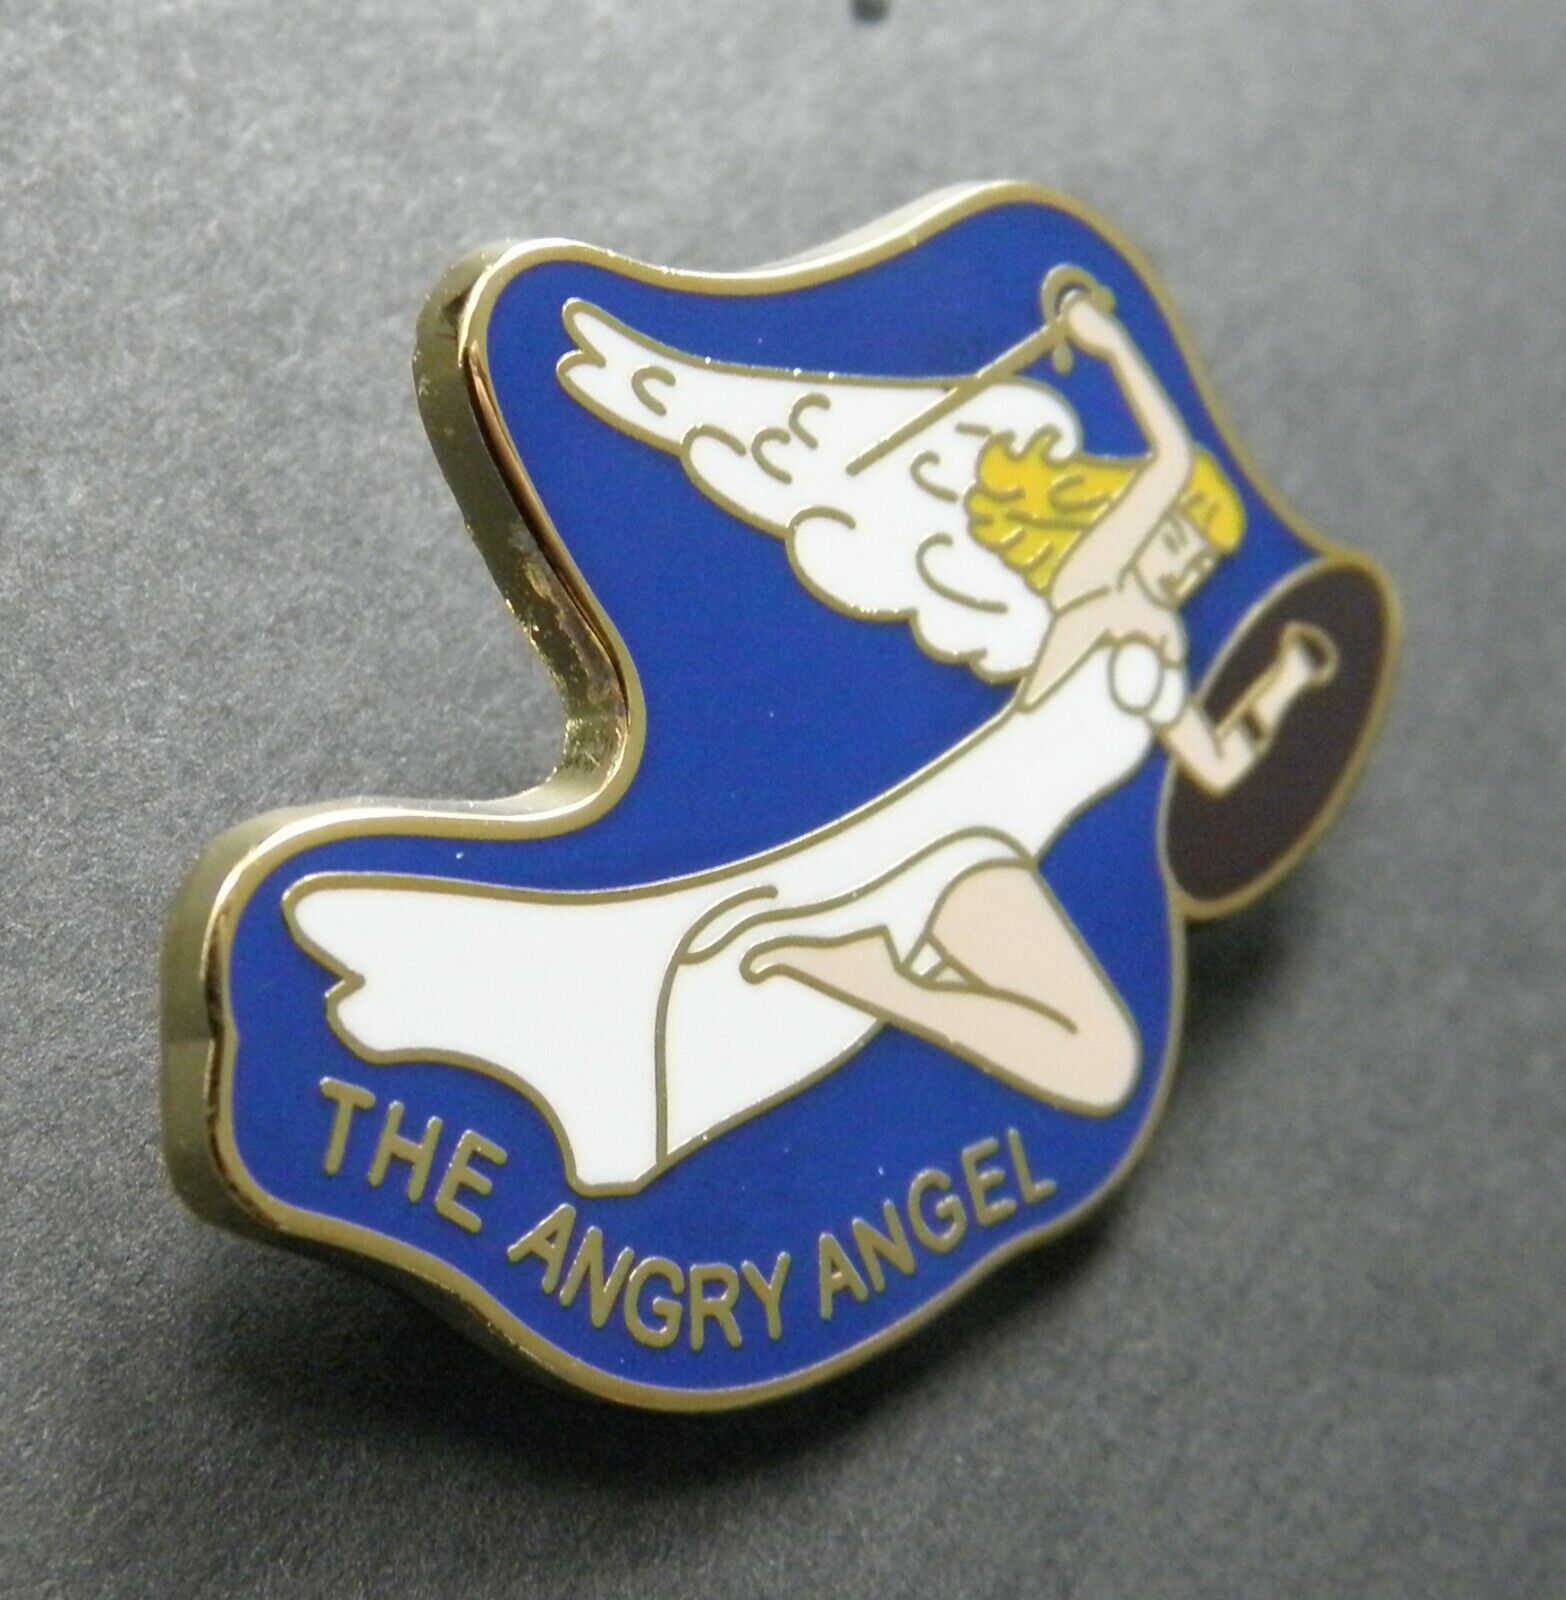 ARMY AIR FORCE NOSE ART PINUP ANGRY ANGEL GIRL LAPEL HAT PIN BADGE 1 INCH